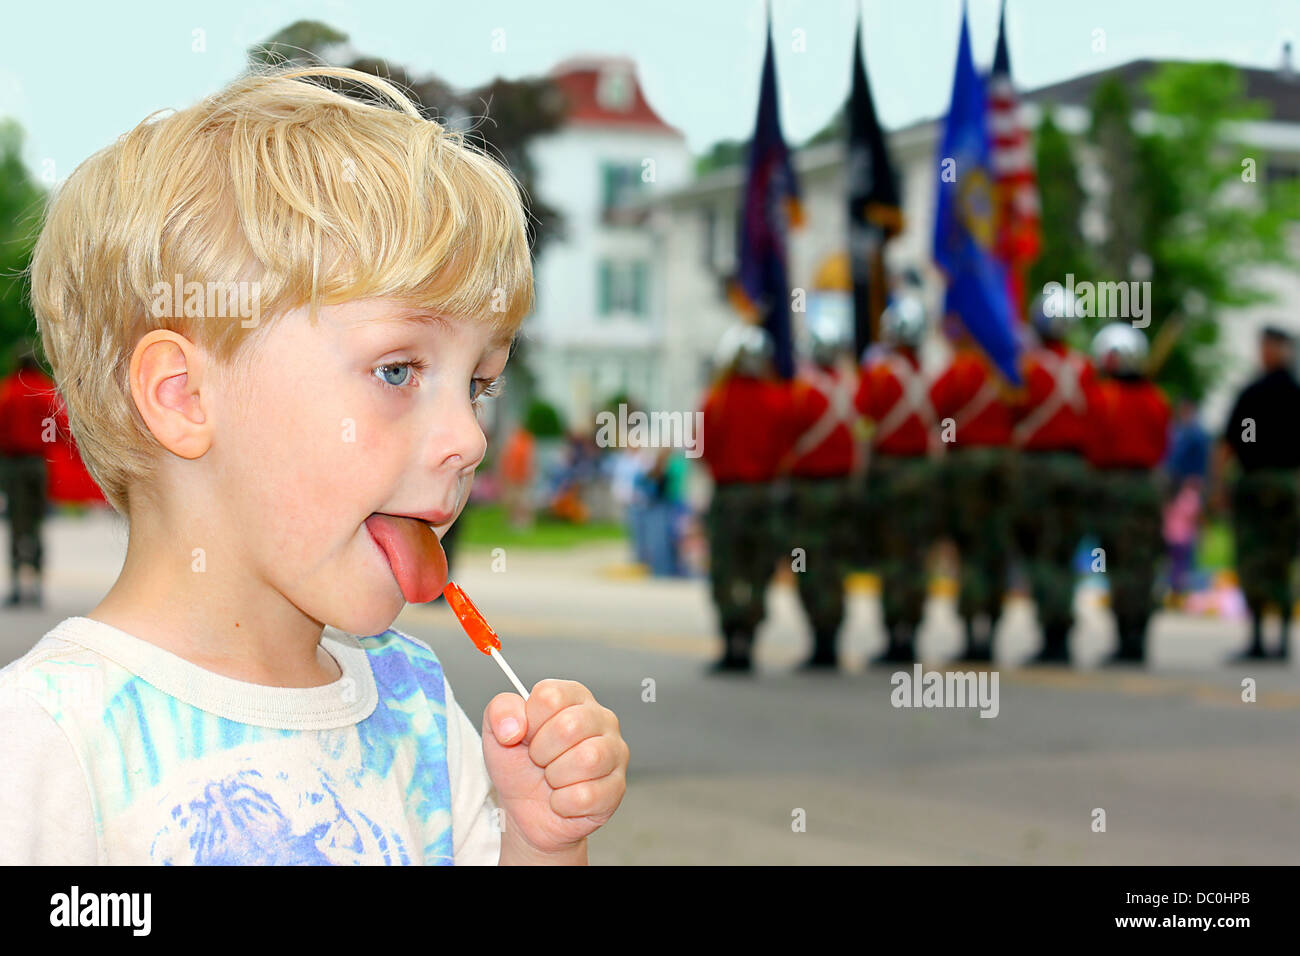 A Child is at a parade. licking a candy sucker, as military members holding American flags march by Stock Photo